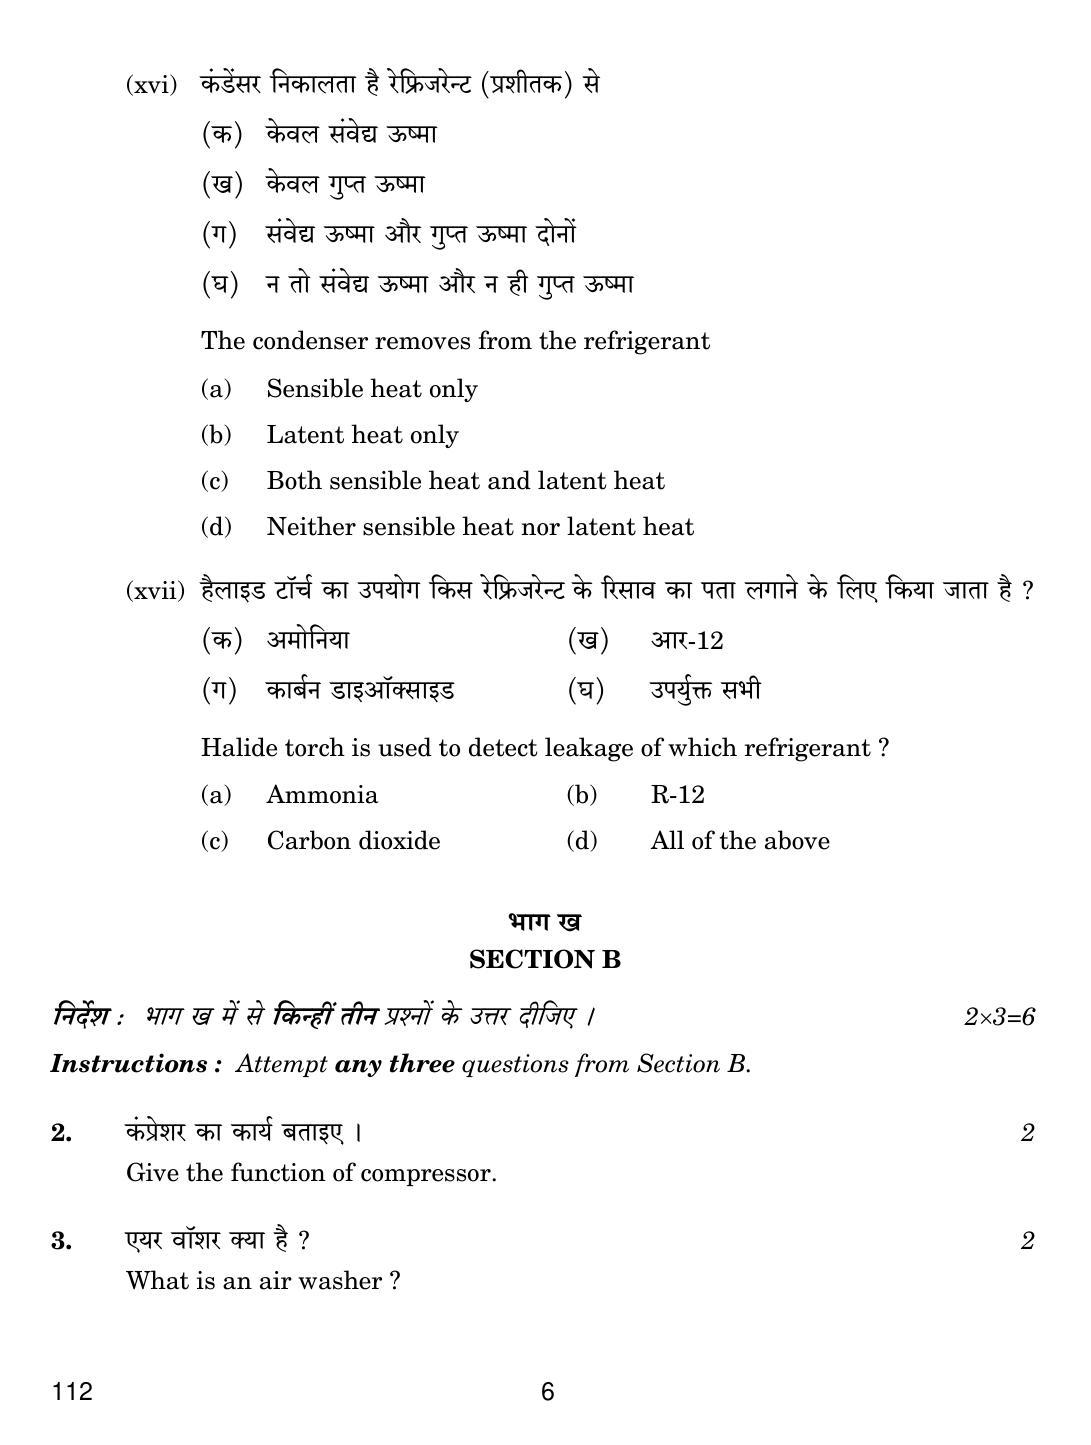 CBSE Class 12 112 Air-Conditioning And Refrigeration-III 2019 Question Paper - Page 6